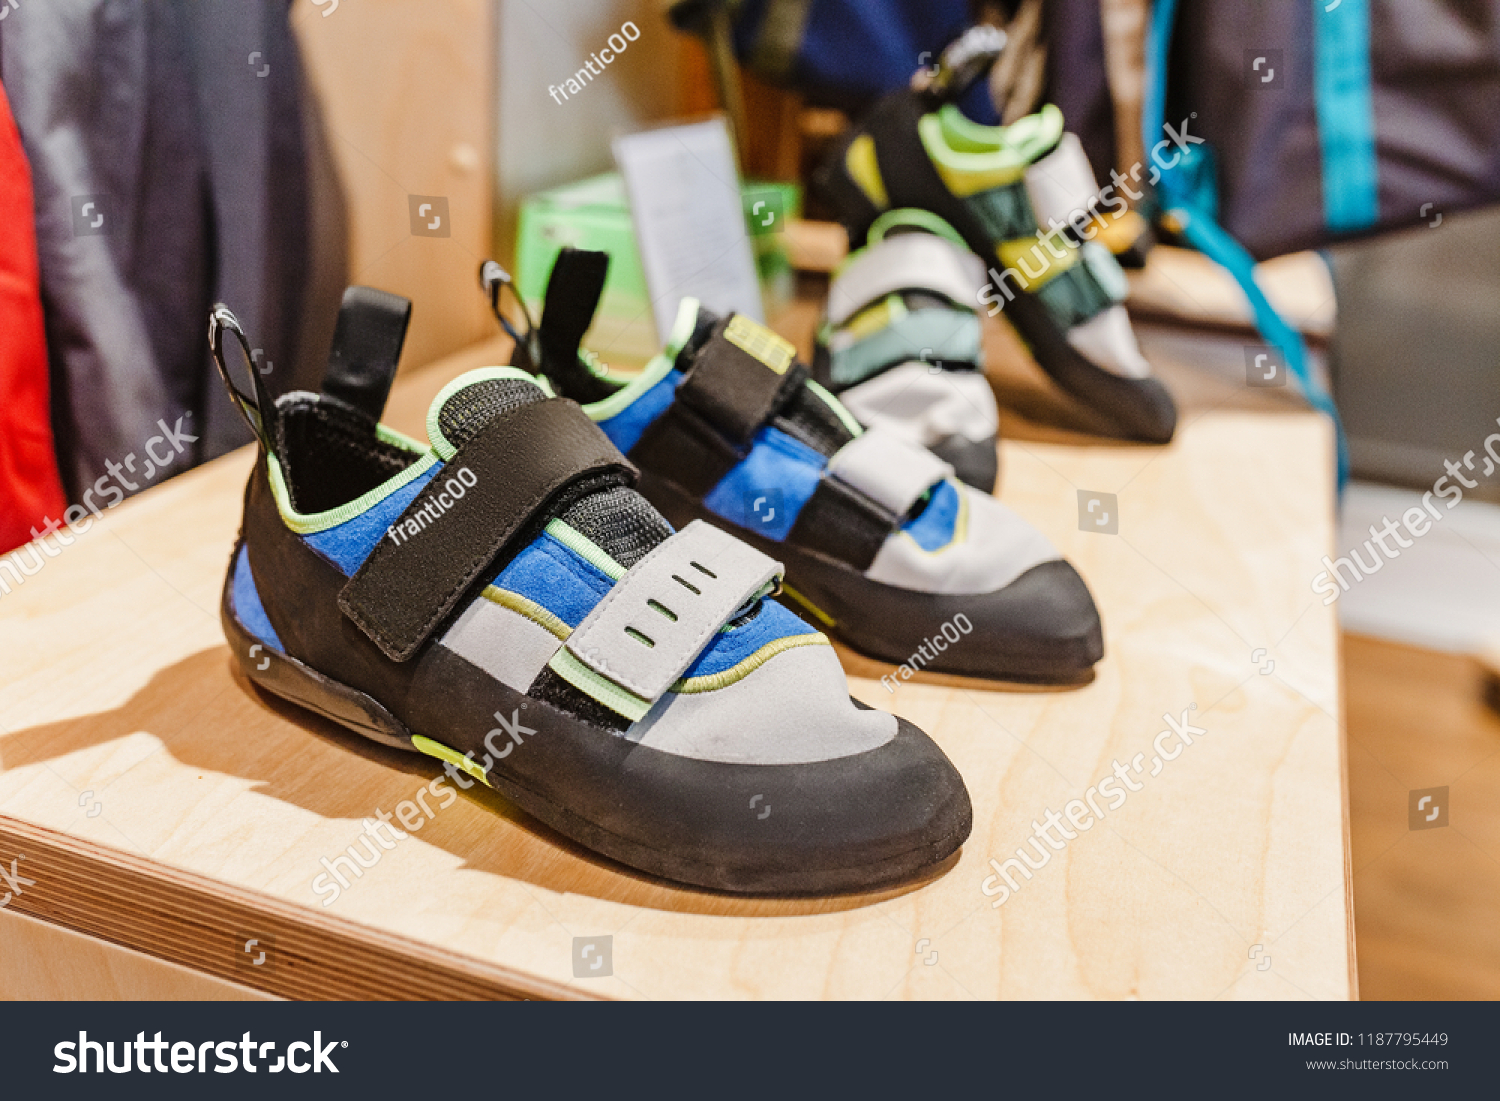 climbing shoes on sale